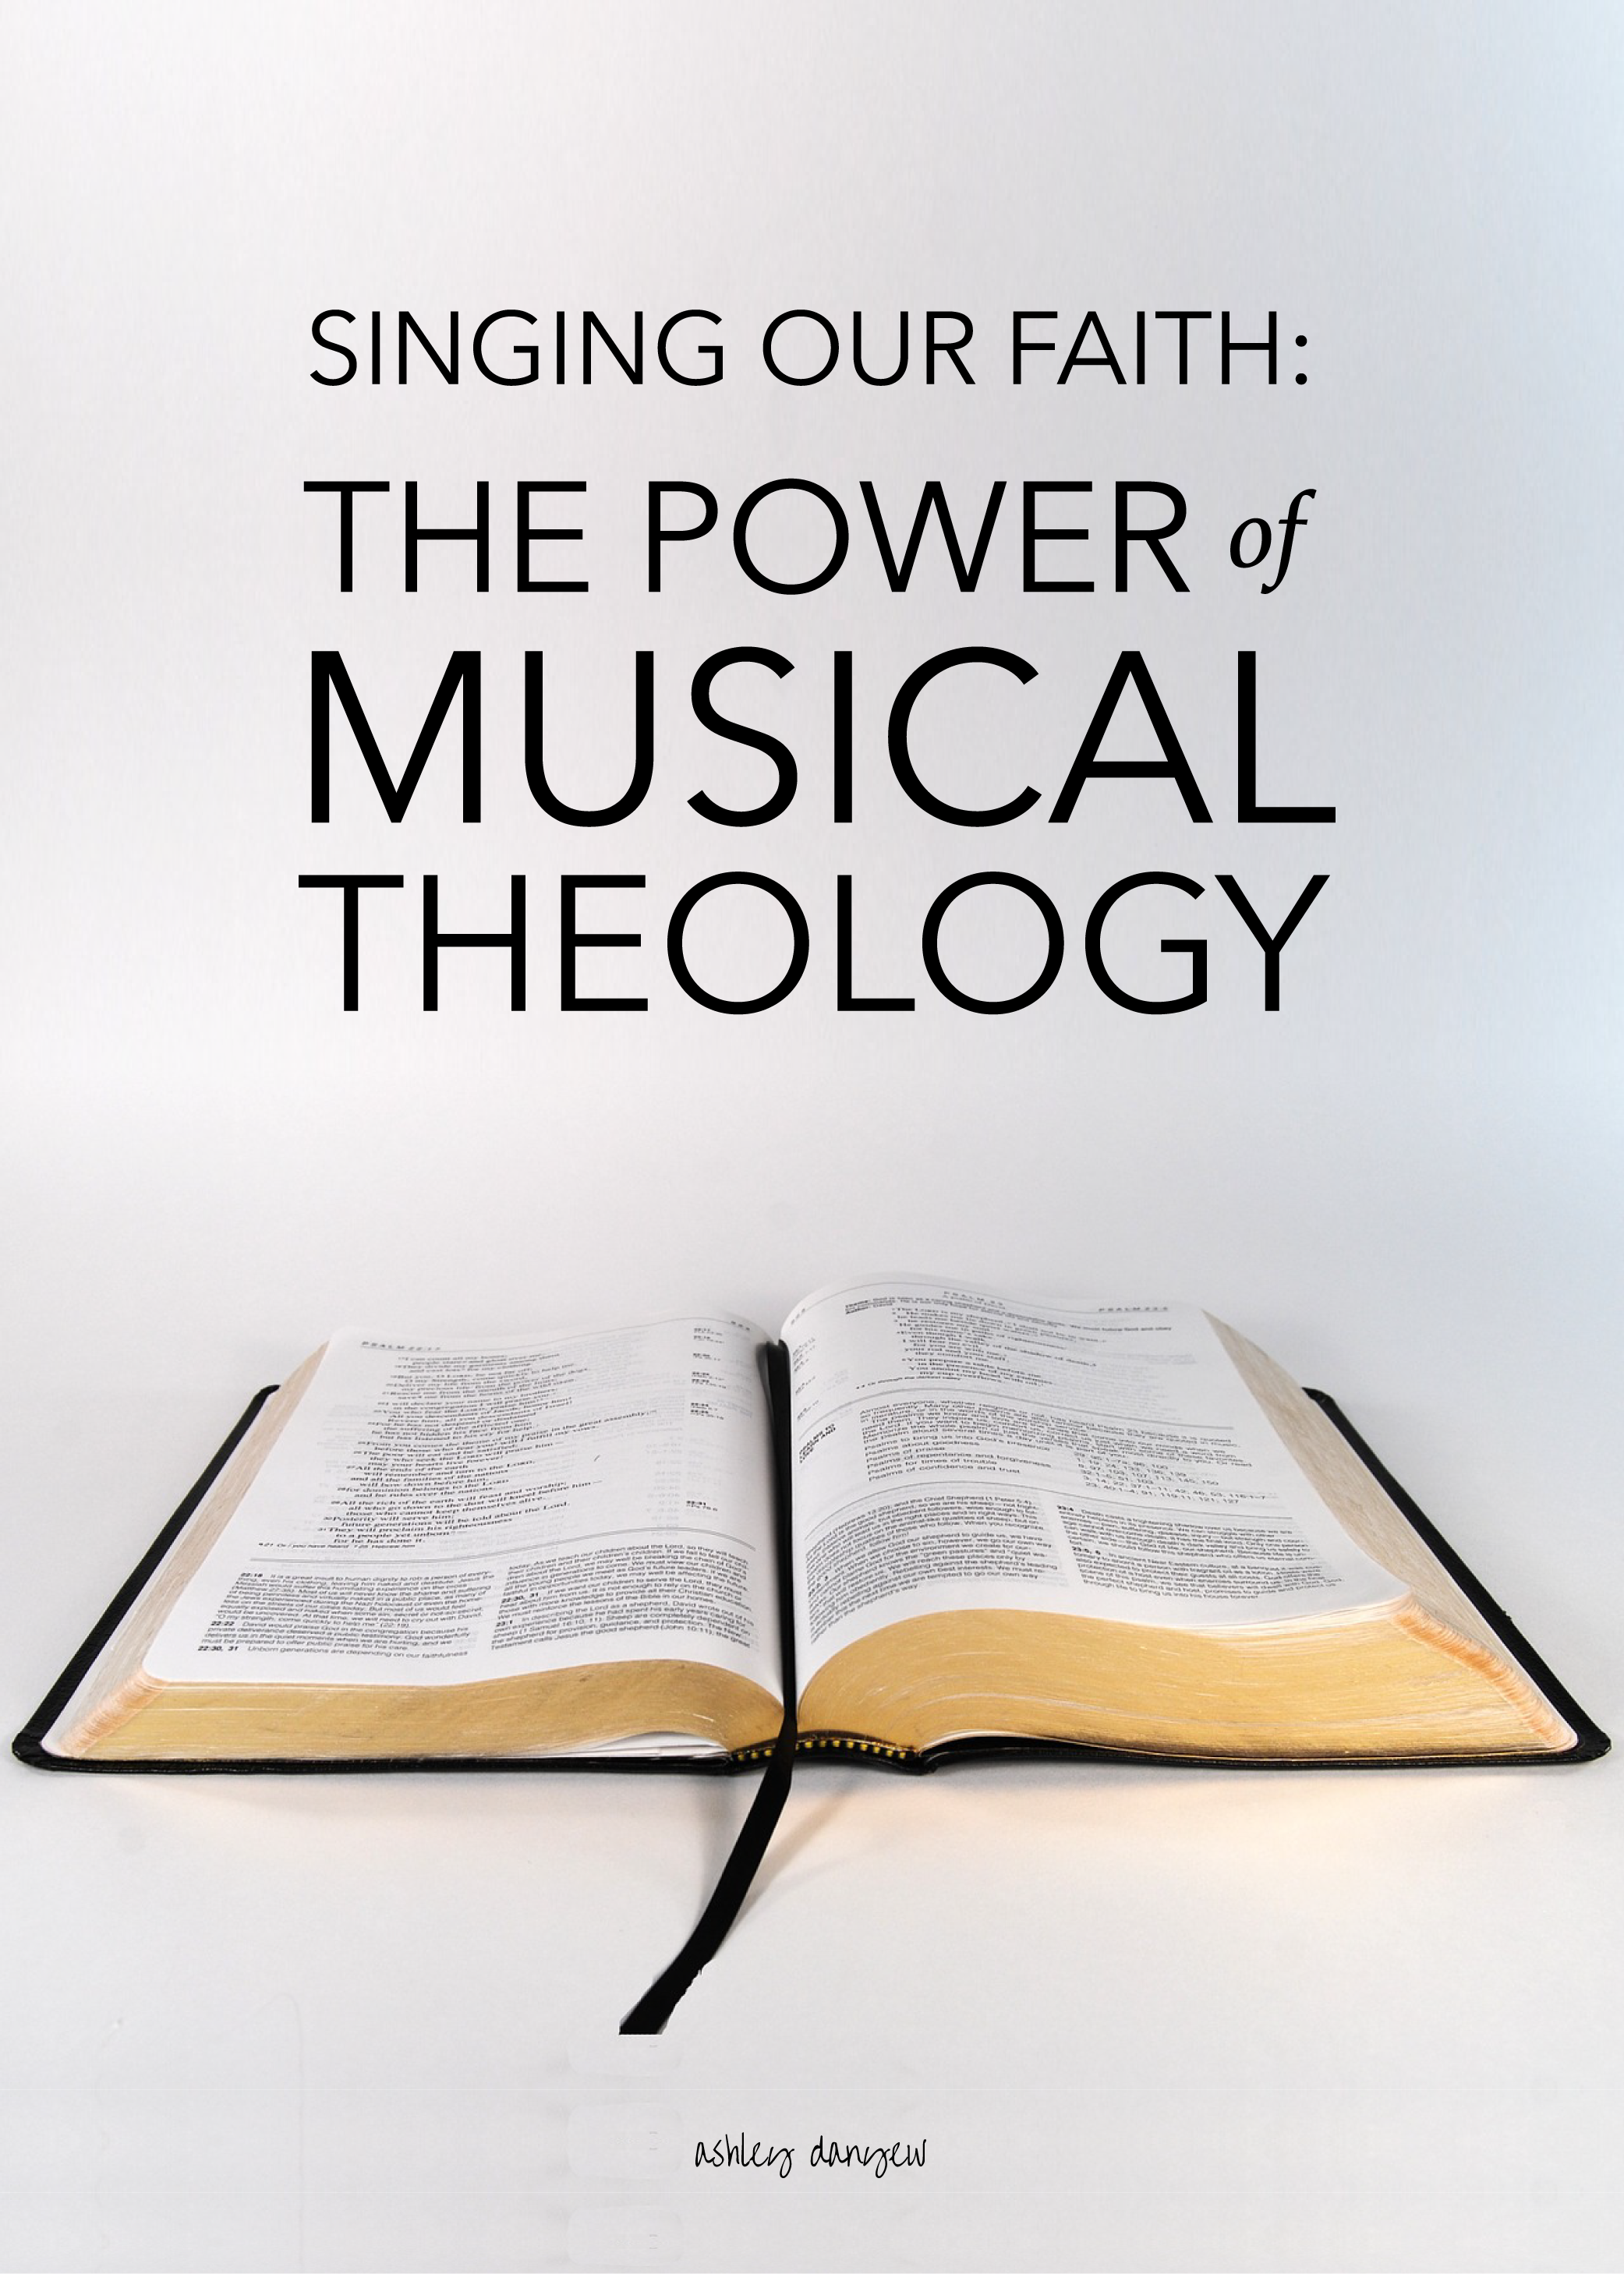 Copy of Singing Our Faith: The Power of Musical Theology